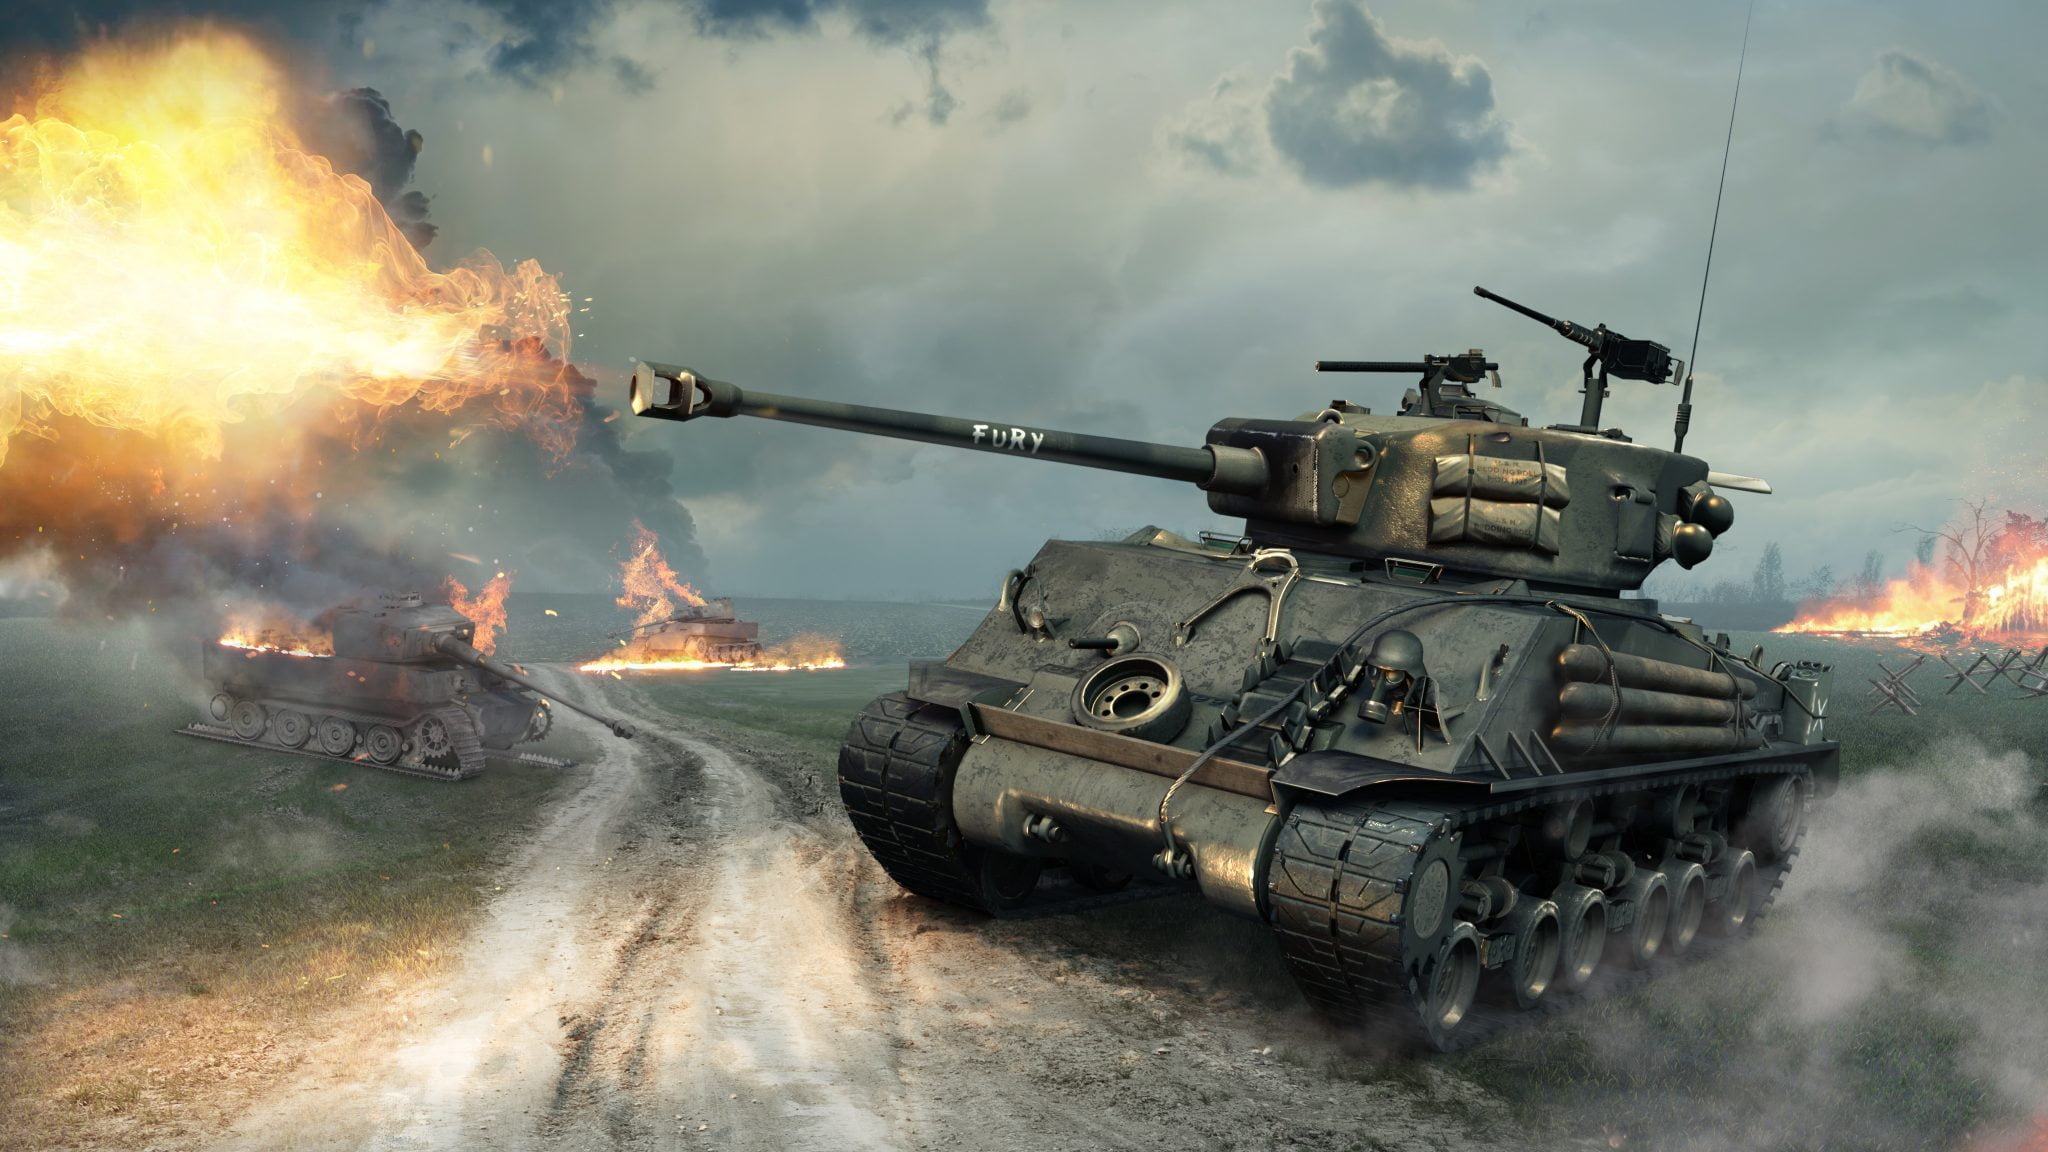 Sony Pictures’ “FURY” Coming to World of Tanks 24